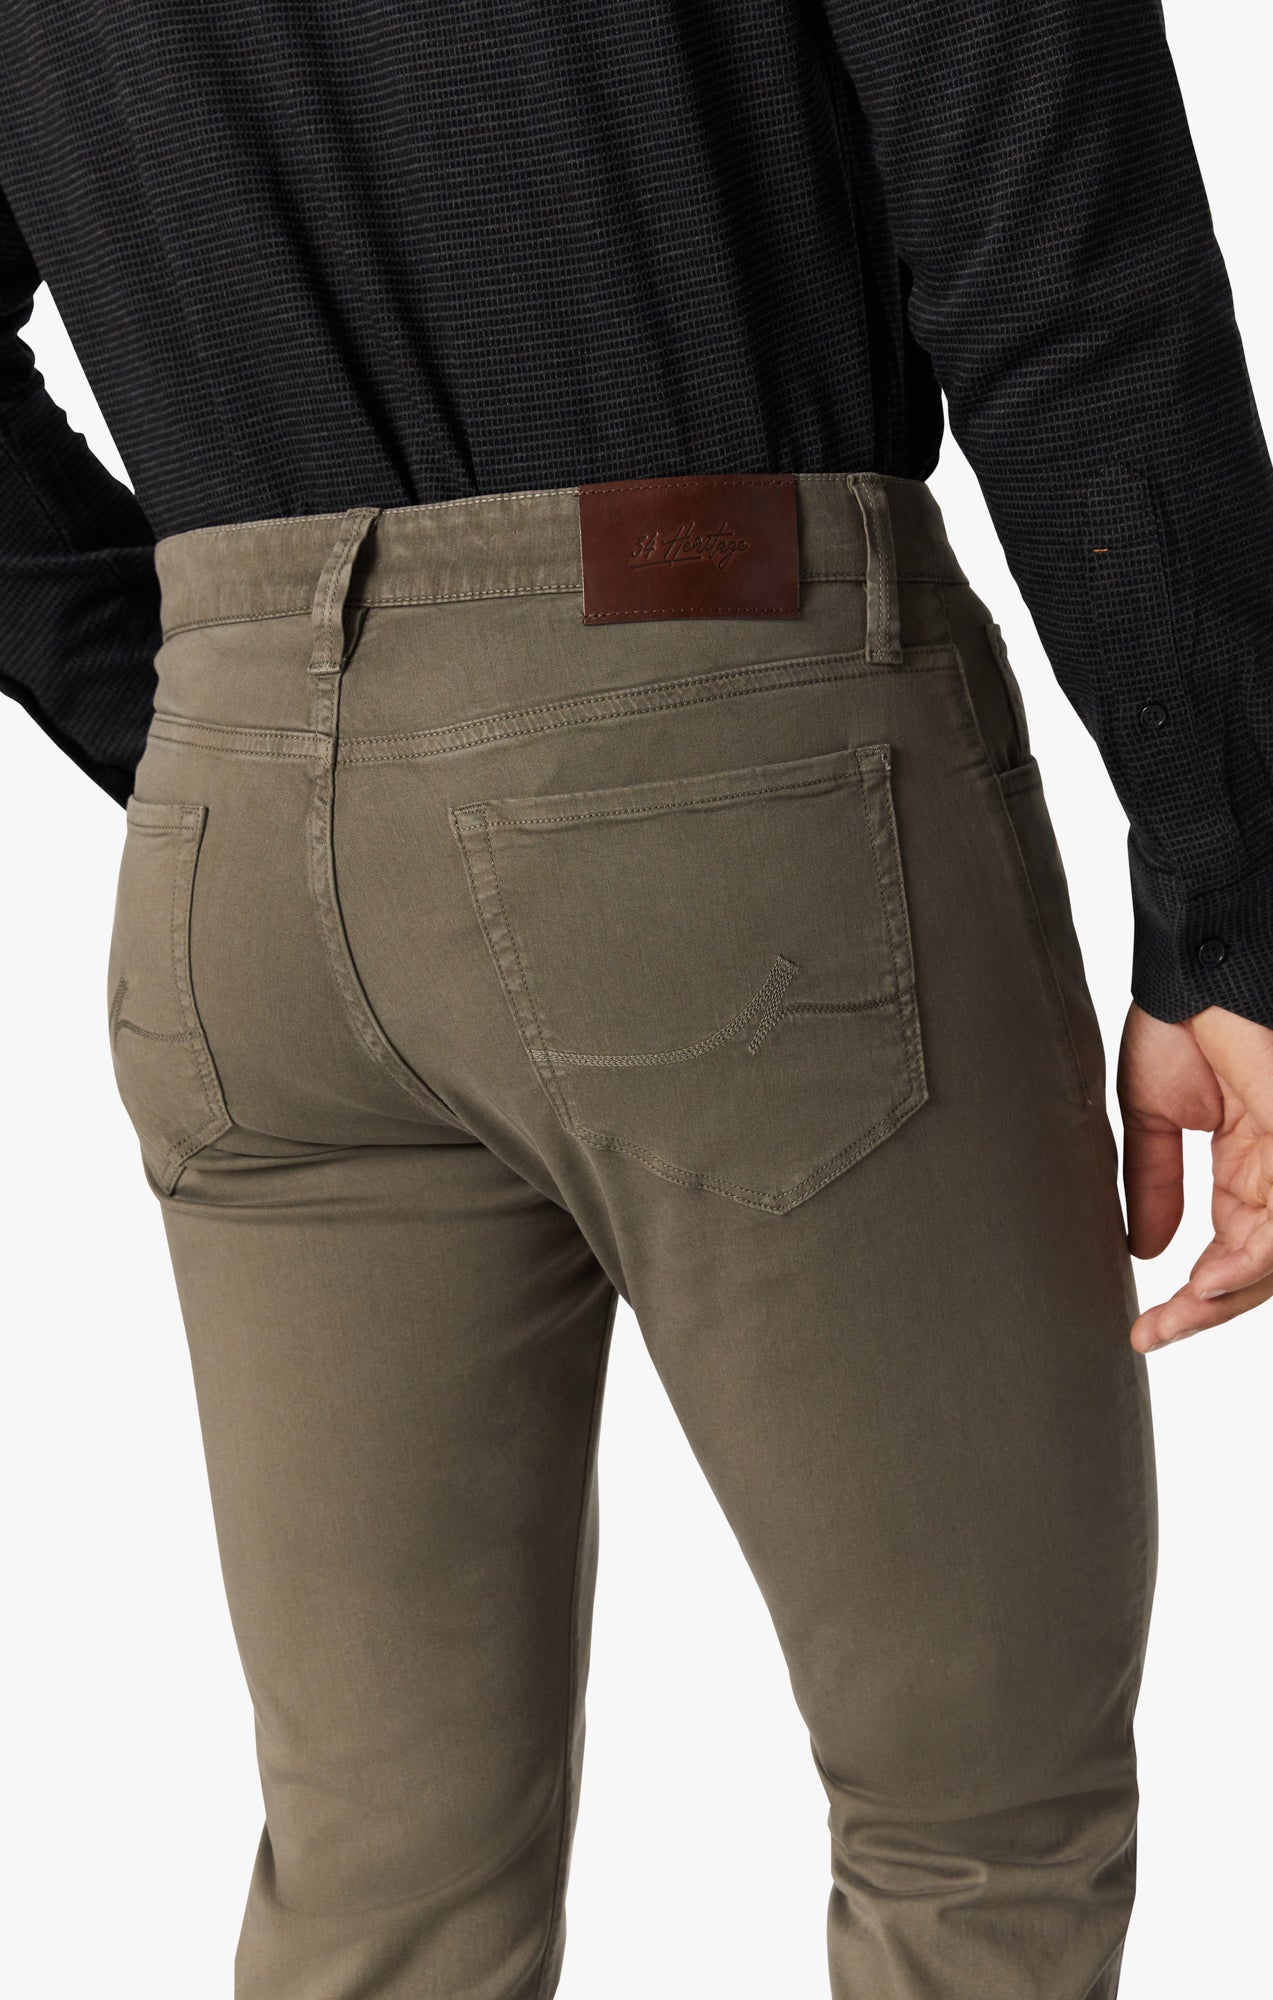 Courage Straight Leg Pants in Canteen Twill Image 5